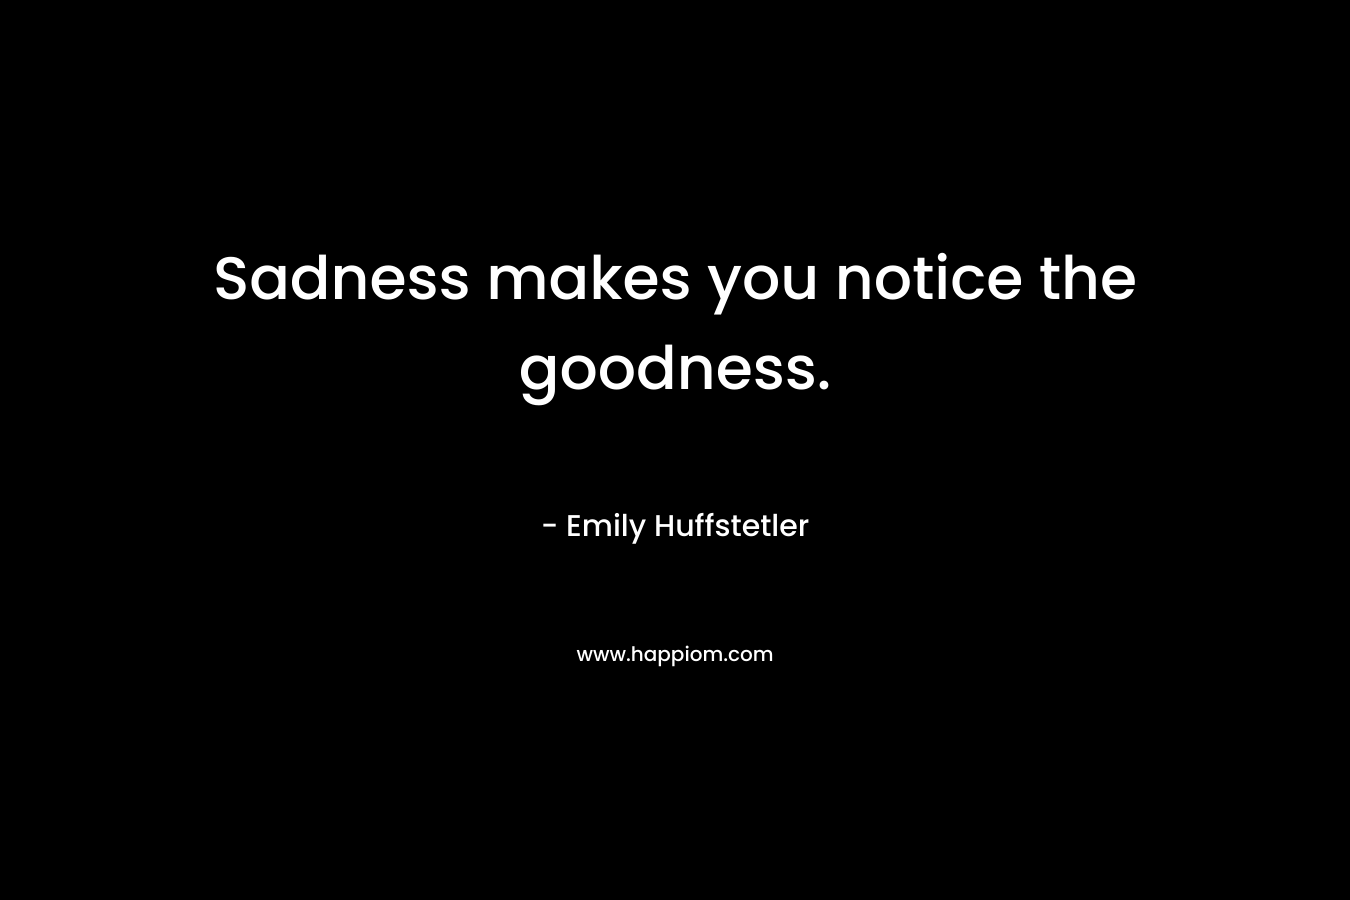 Sadness makes you notice the goodness. – Emily Huffstetler